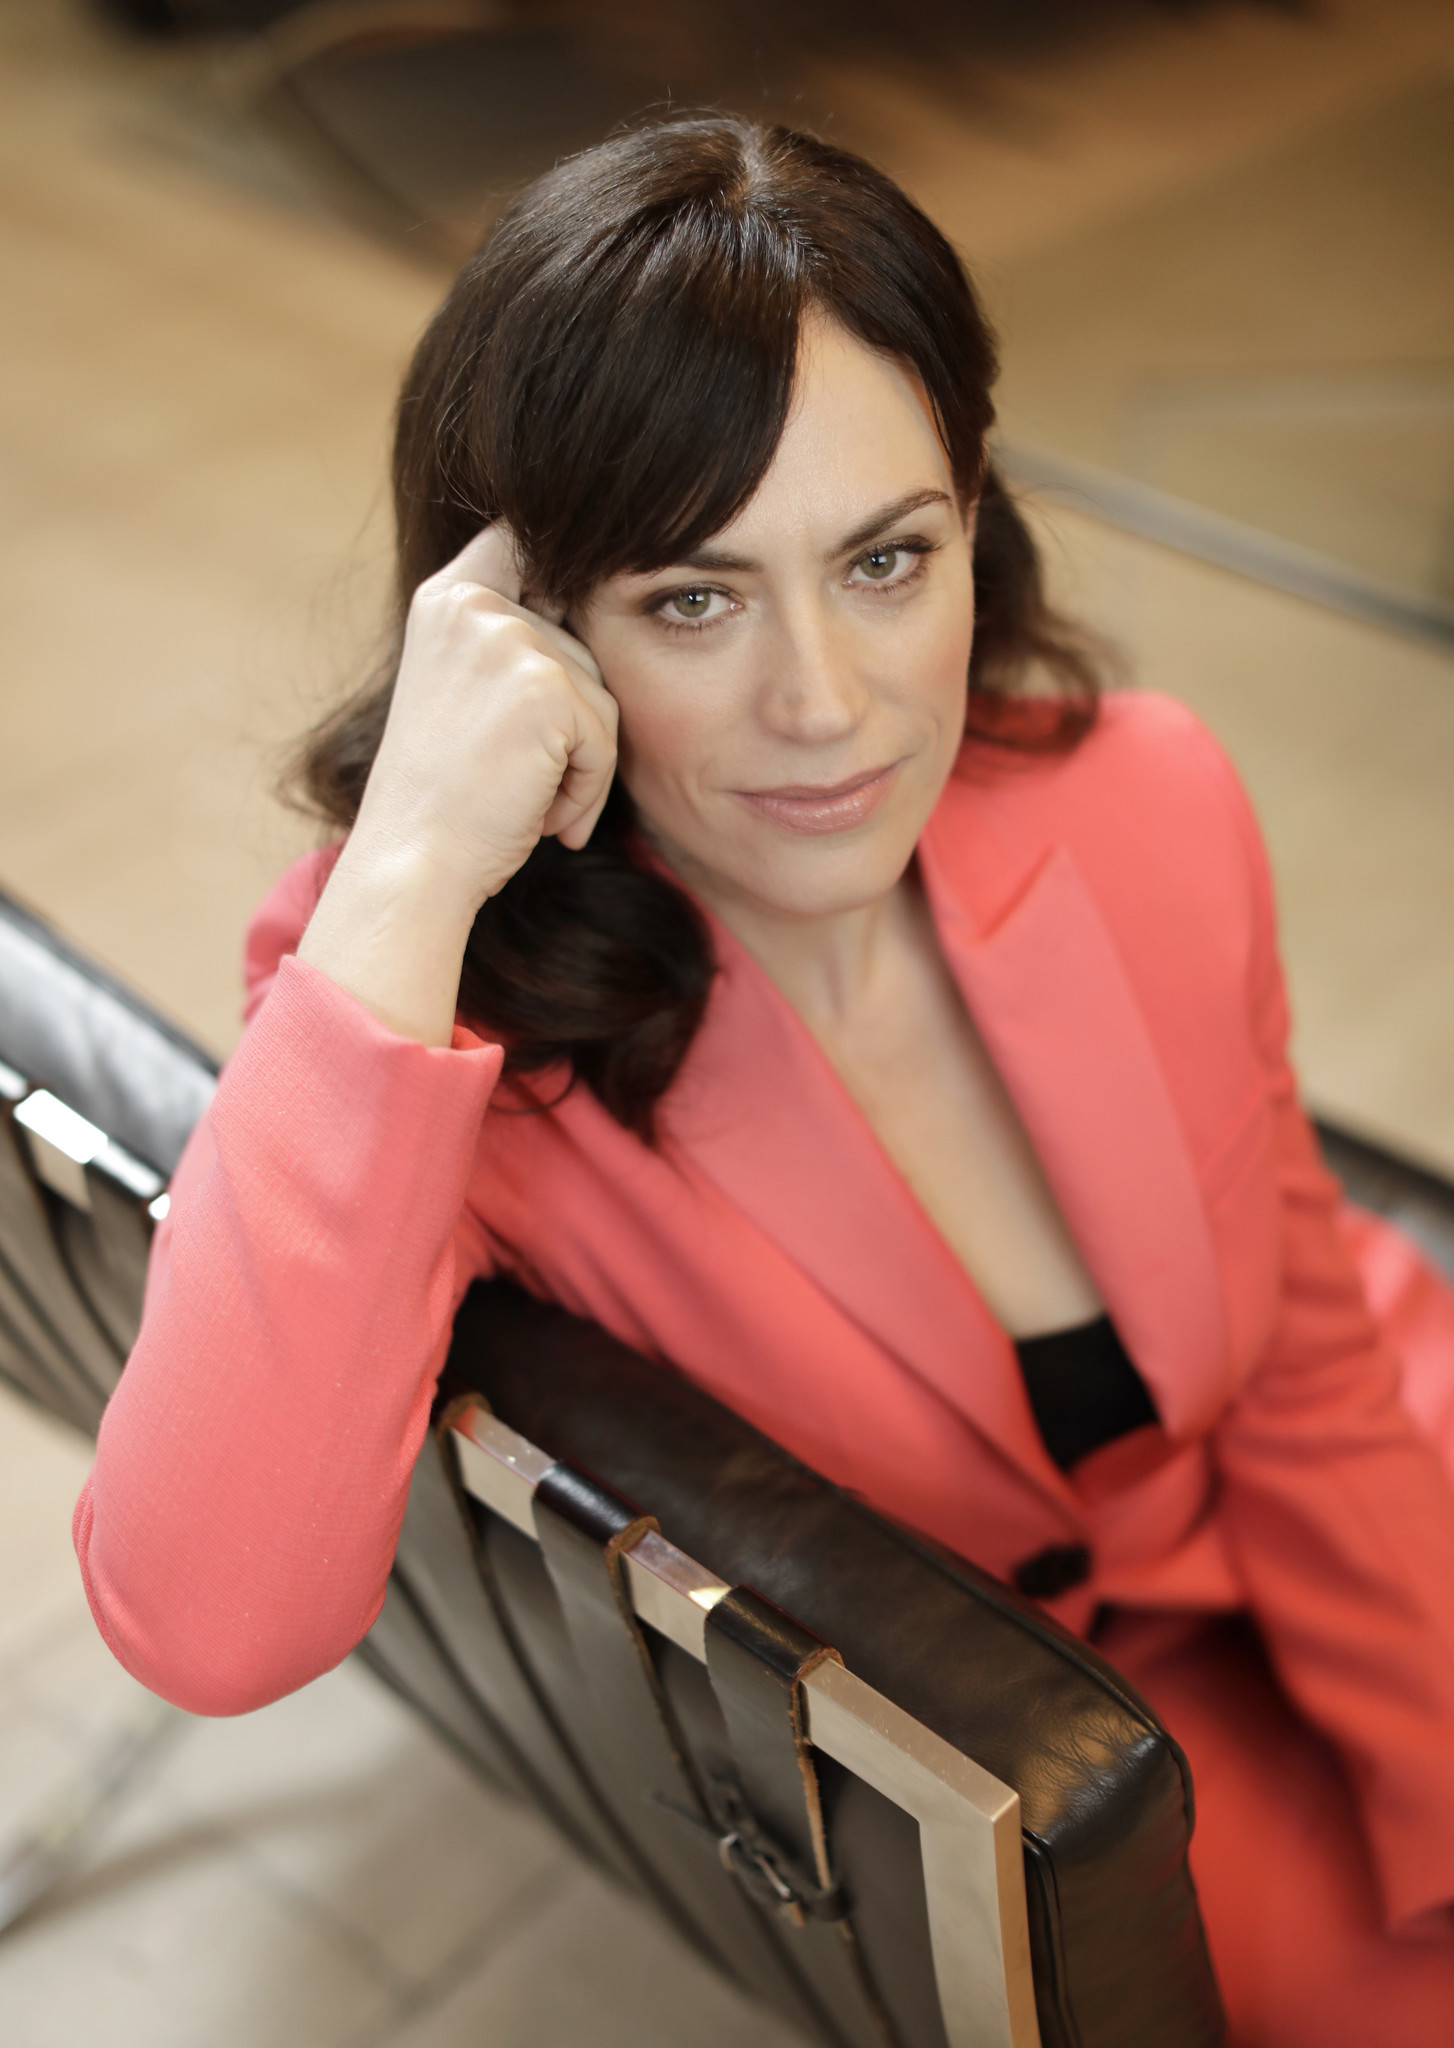 Lawyers, kink and money: Maggie Siff finds her richest role yet in Showtime's 'Billions' Angeles Times